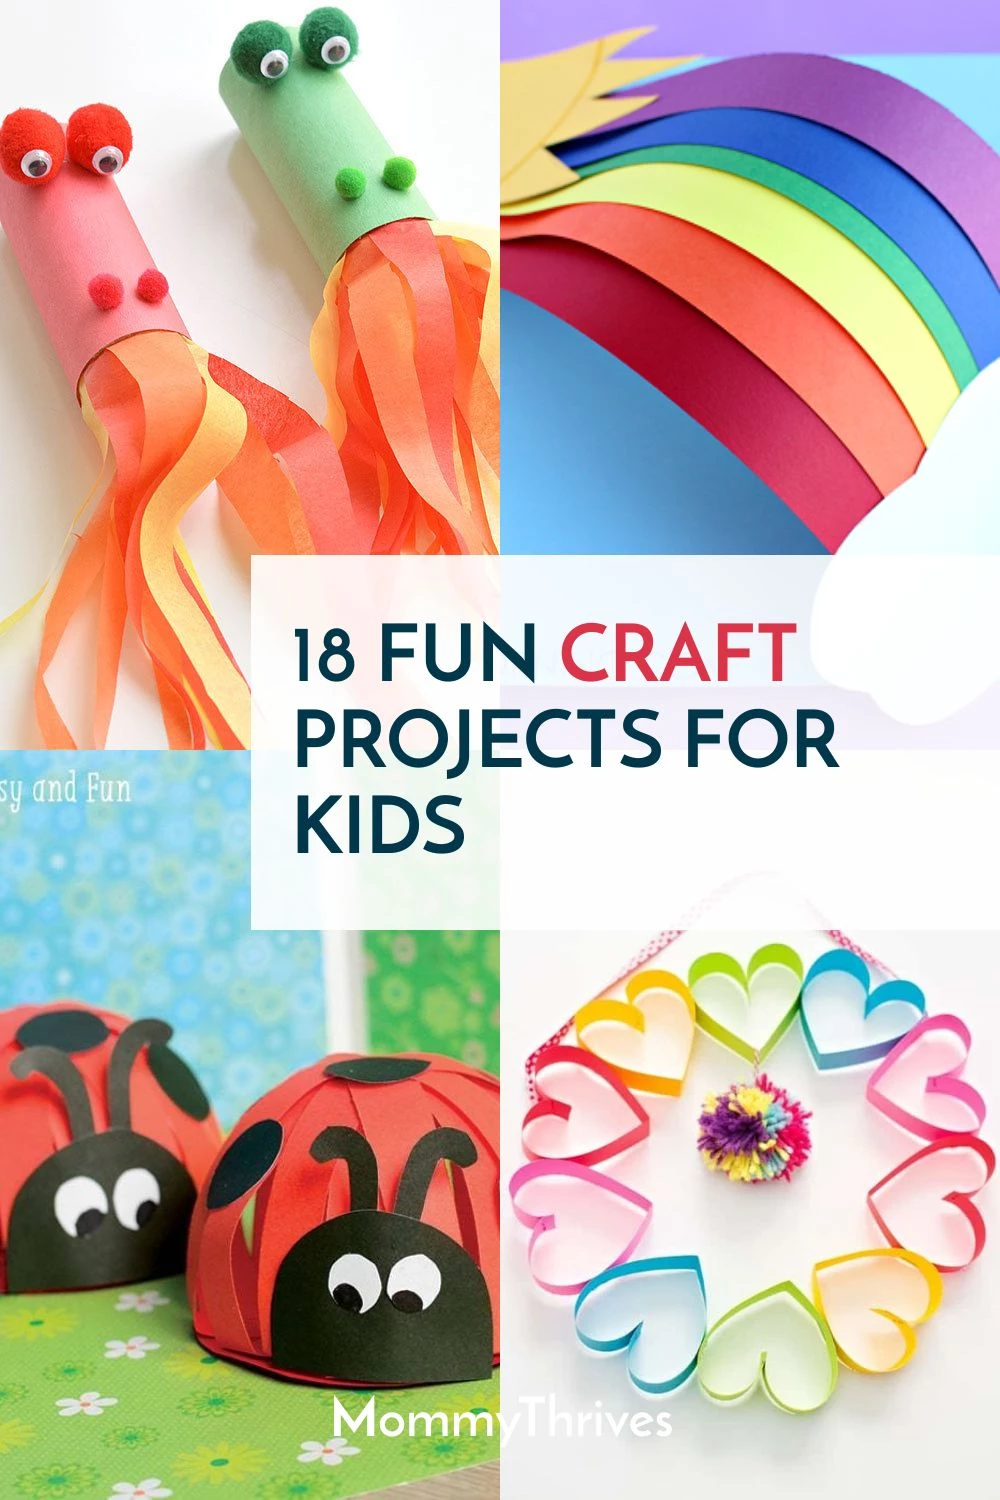 https://www.mommythrives.com/wp-content/uploads/2018/07/Art-Projects-for-Kids-Easy-Craft-Ideas-For-Kids-Crafts-for-Kids-Paper-Craft-Ideas-for-Kids-1.webp